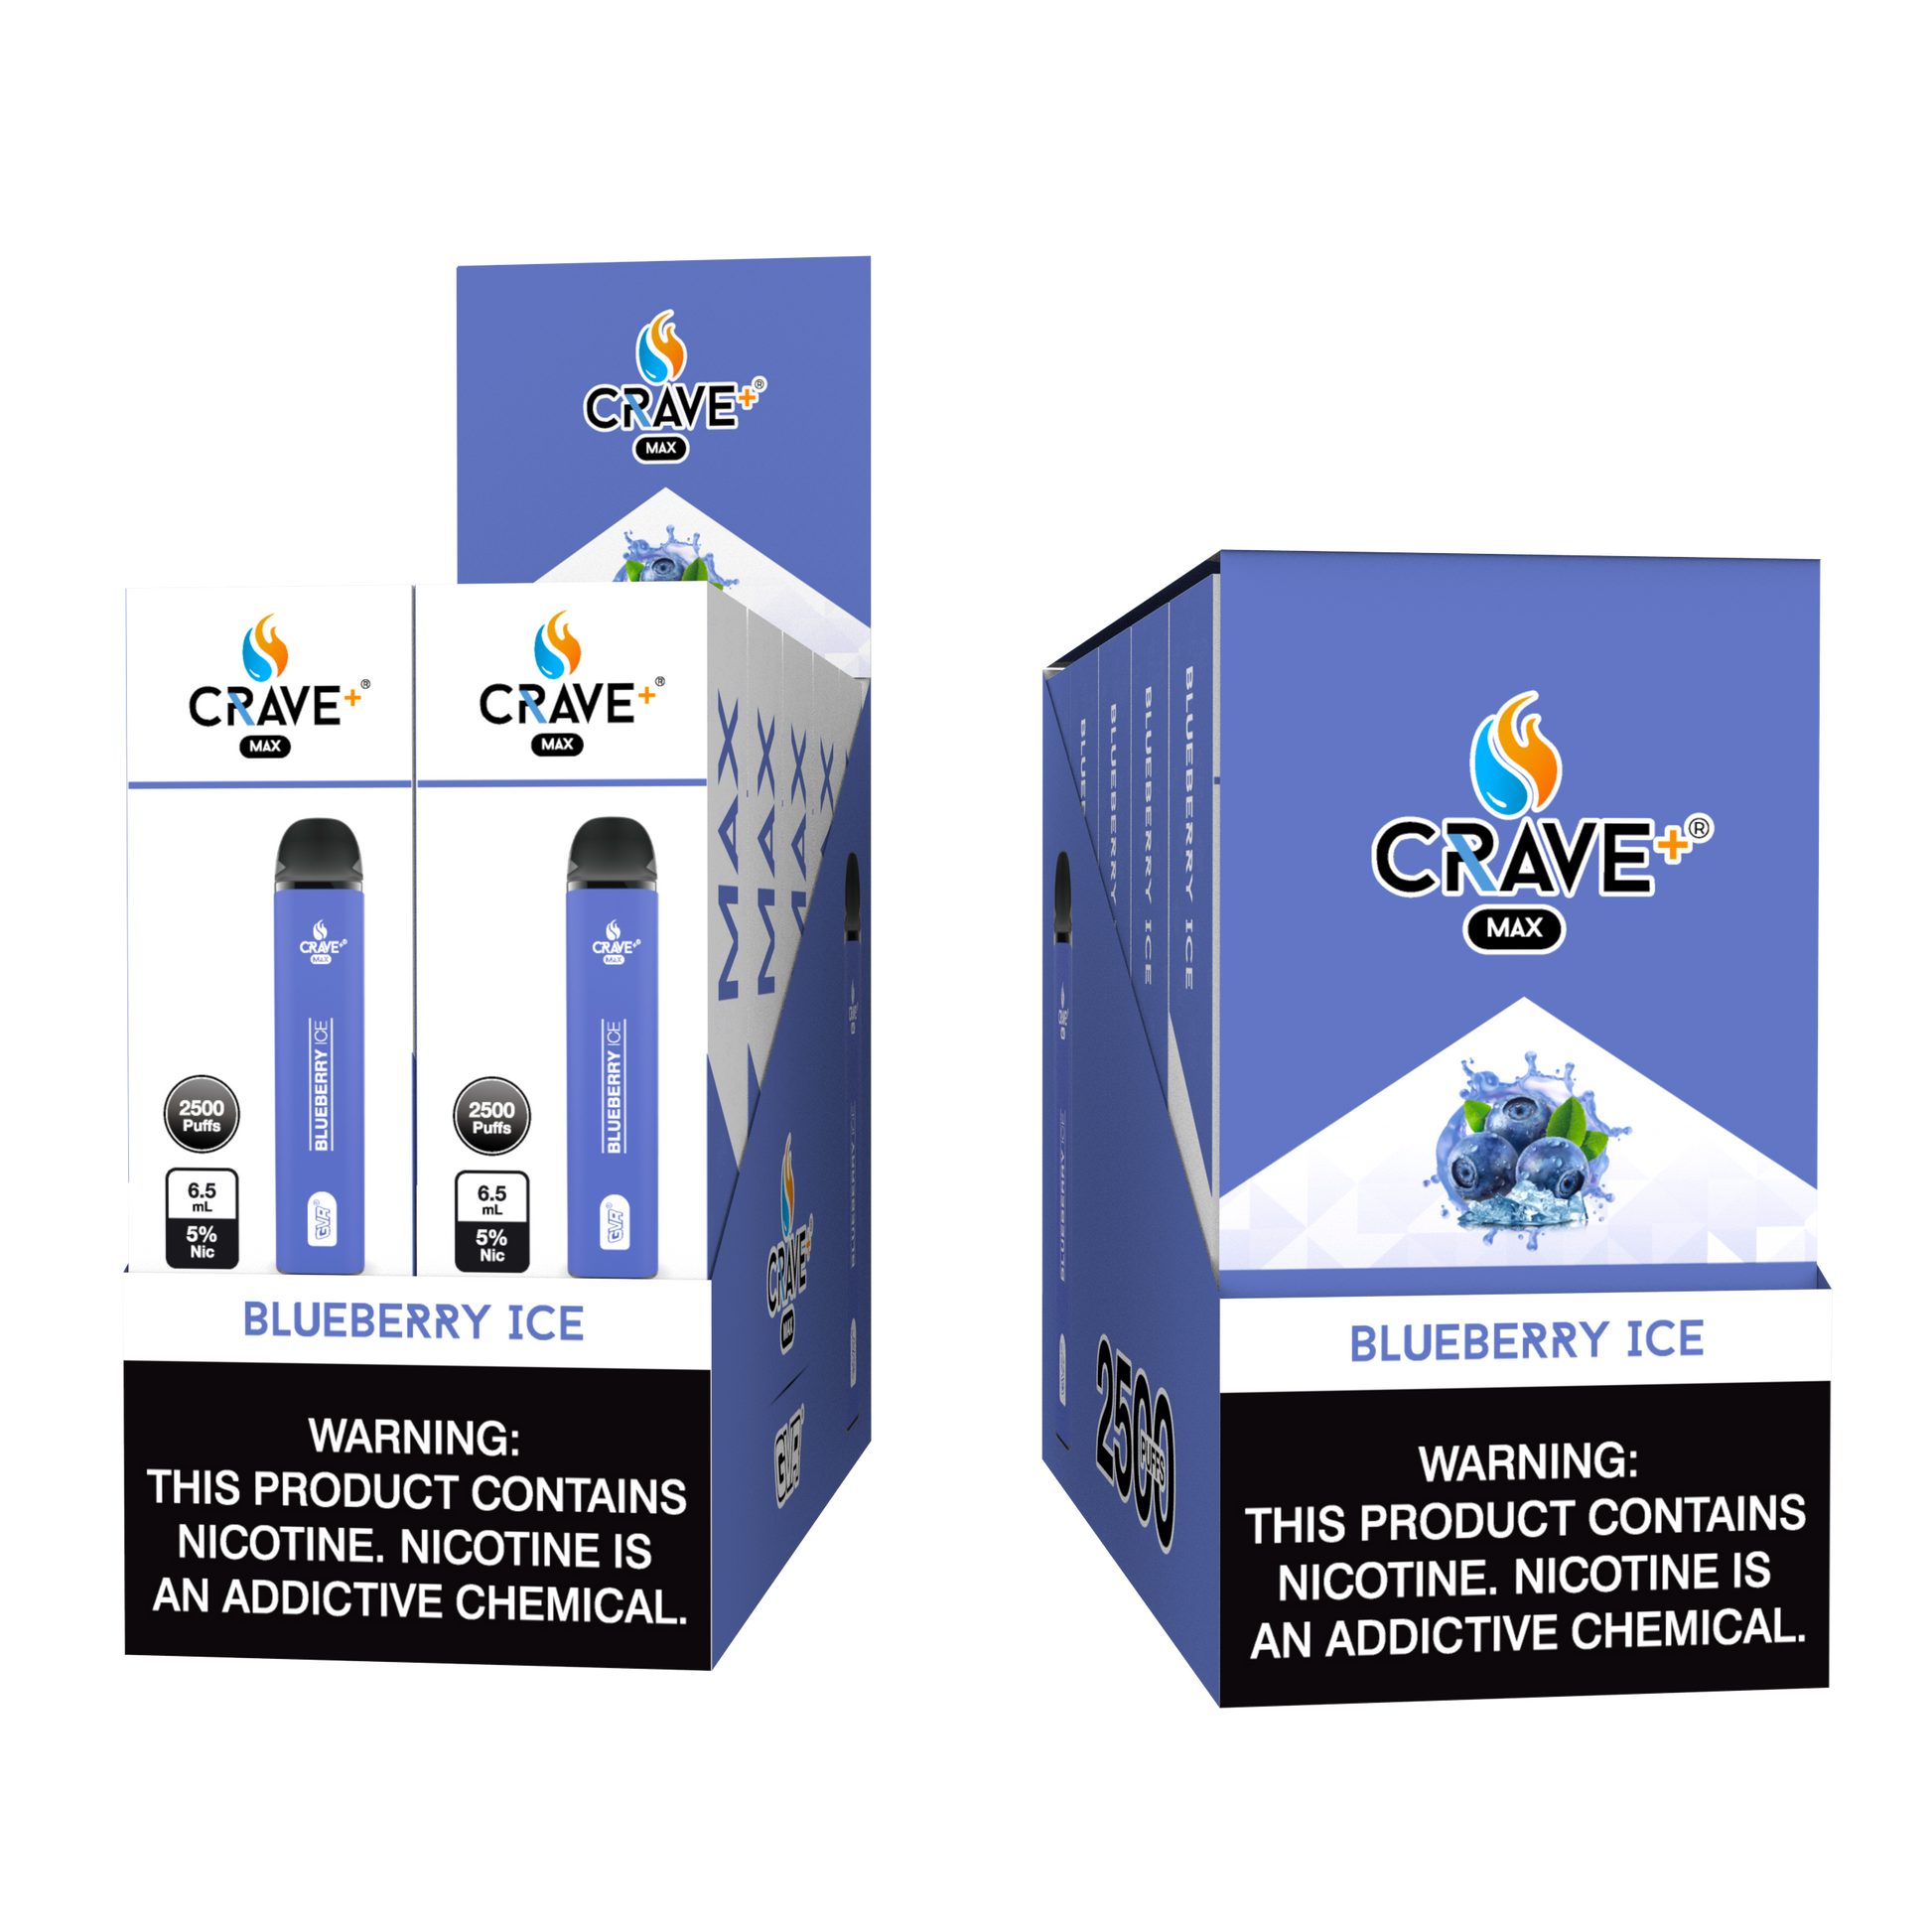 crave max, crave max blueberry ice, crave blueberry ice, crave max blue ice, crave max clear, crave max flavors, crave max for sale, buy crave max online, buy crave online, crave max gvr, crave max disposable 2500 puffs, crave max bulk, crave disposable bulk, crave max disposable 2500 puffs, crave max bulk, crave disposable bulk, crave max disposable, crave max blueberry ice, vape szn, vapeszn, crave max vape